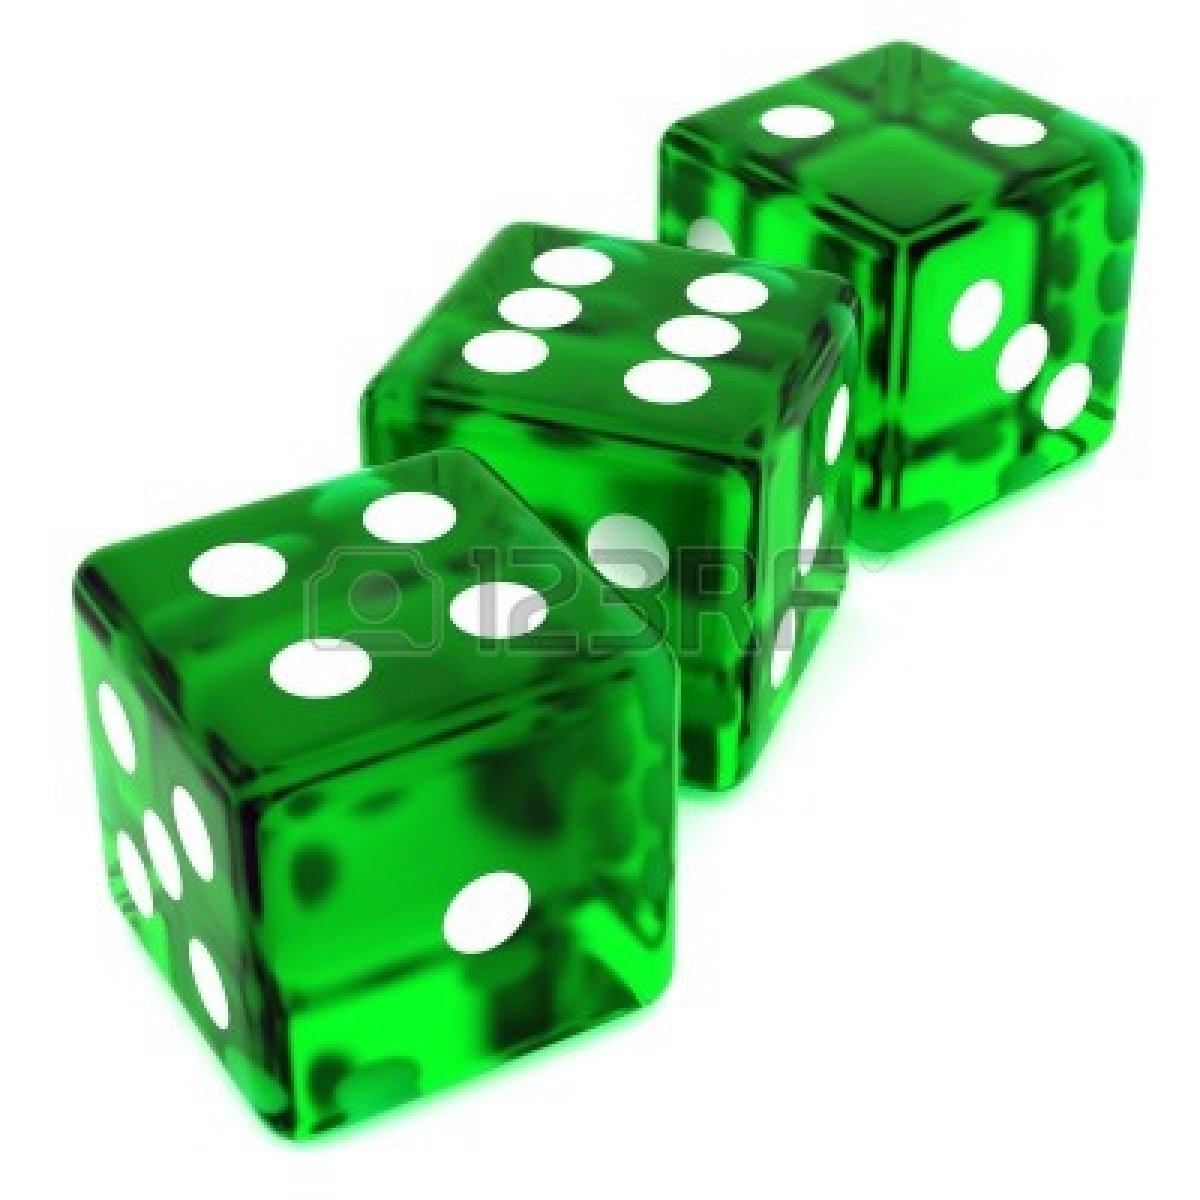 Rolling Dice   Clipart Panda   Free Clipart Images